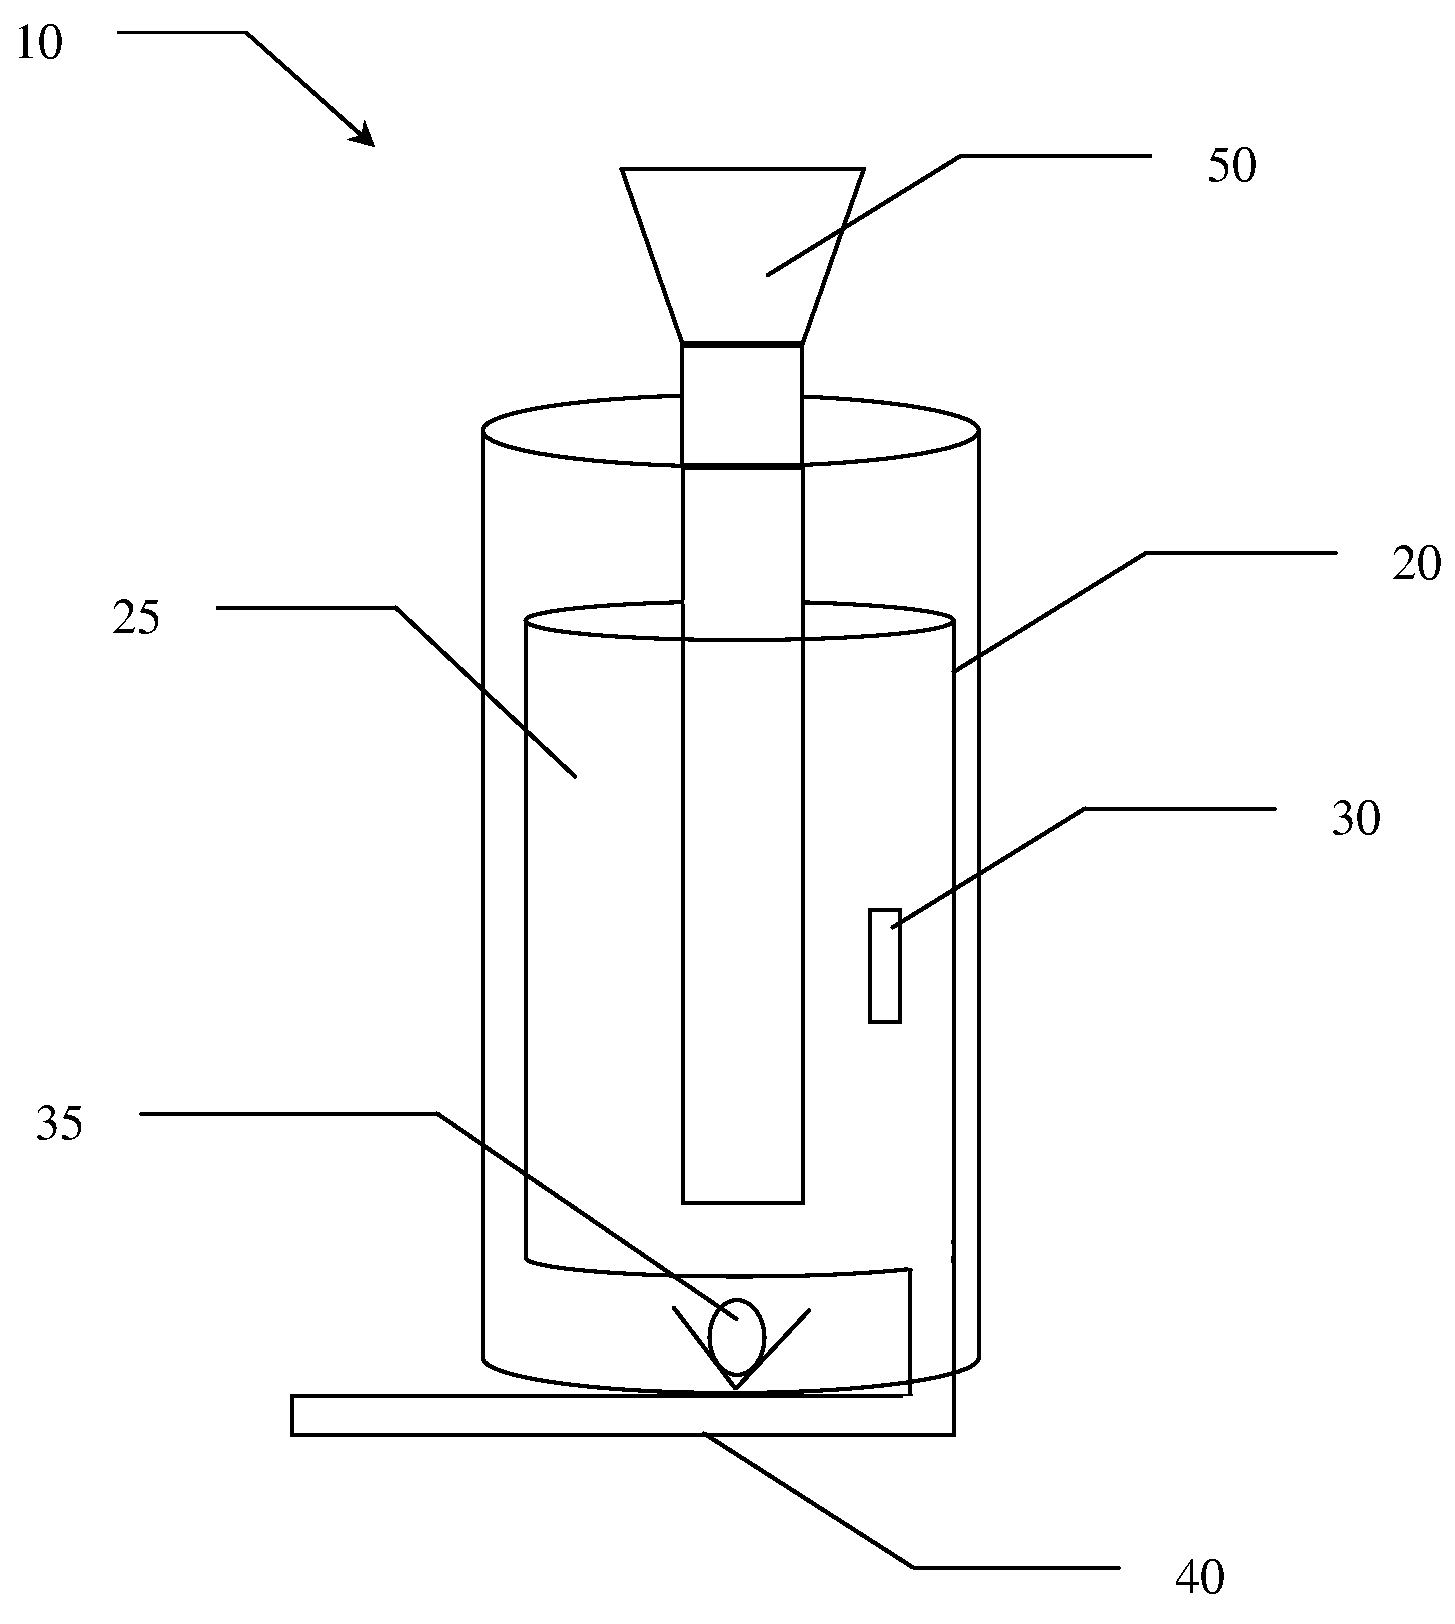 Portable reactor for real-time nucleic acid amplification and detection comprising a reaction chamber formed from a flexible printed circuit board